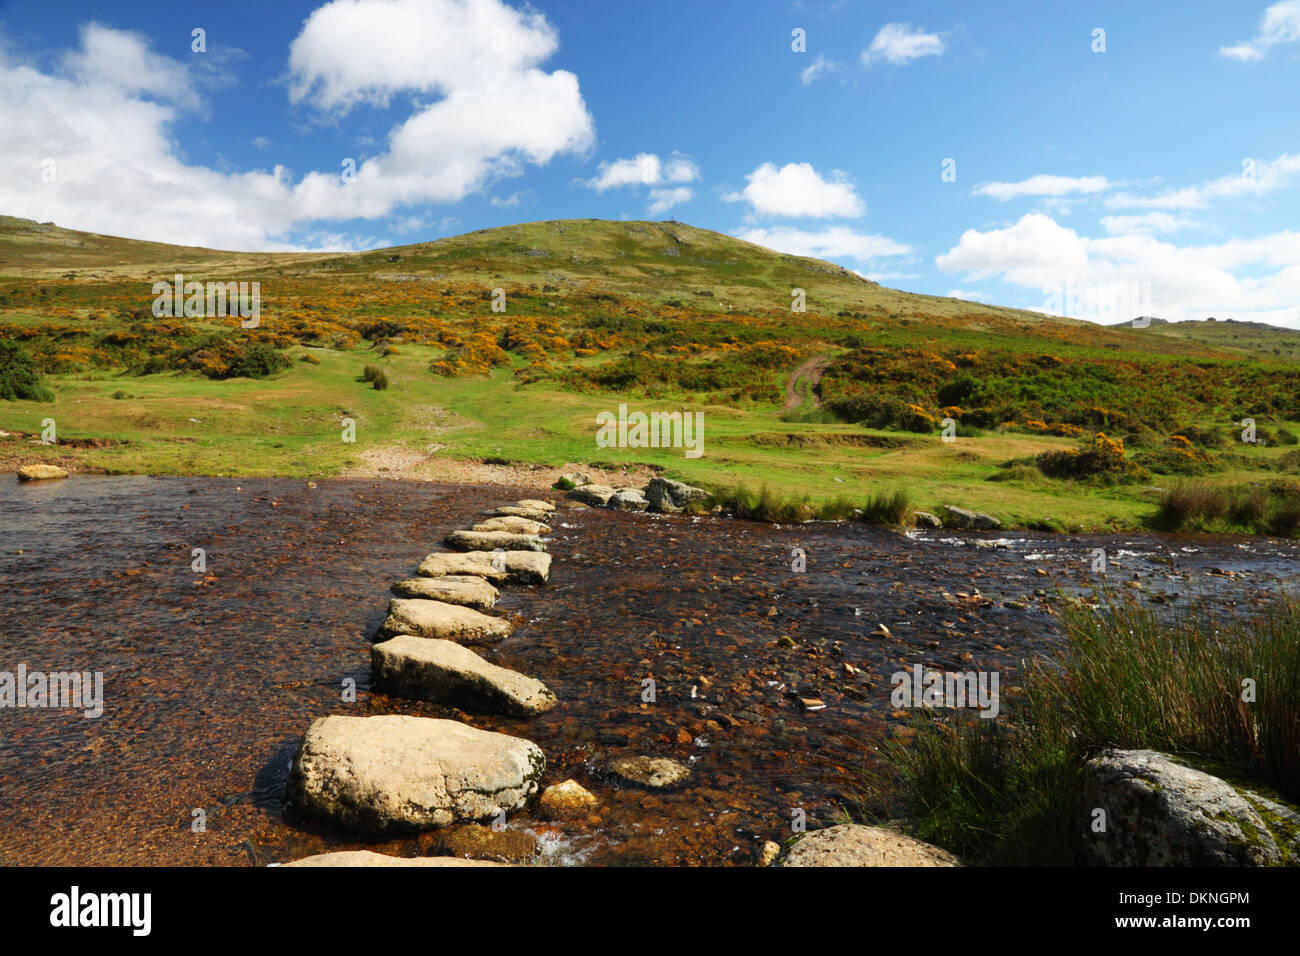 Stepping stones across a moorland stream with a view of Dartmoor in the background. Stock Photo